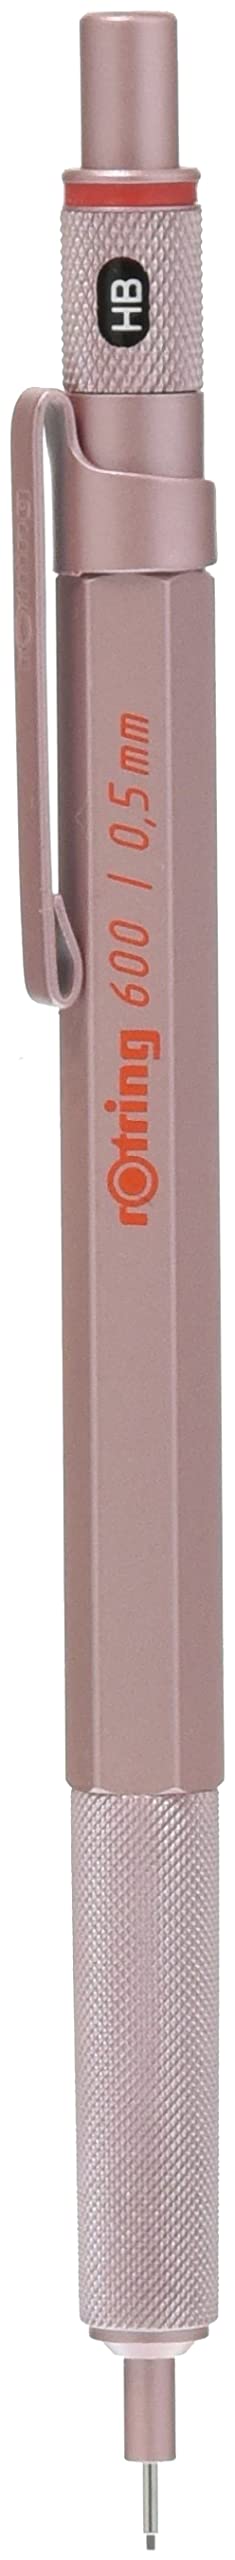 Rotring 600 mechanical graphite pencil Rose Gold 0.5mm 2158794 Brass, Stainless_1